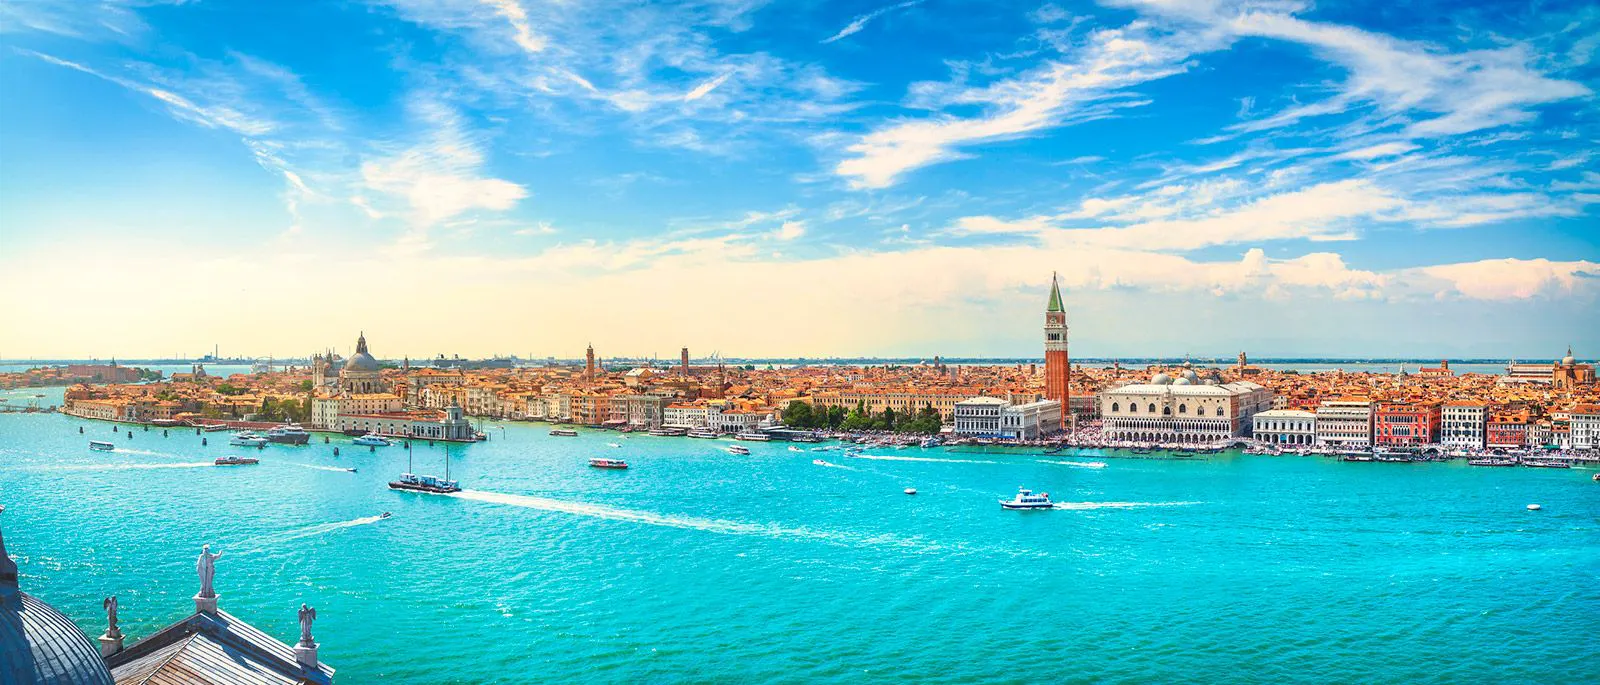 The lagoon in Venice with boats and a view of the city skyline